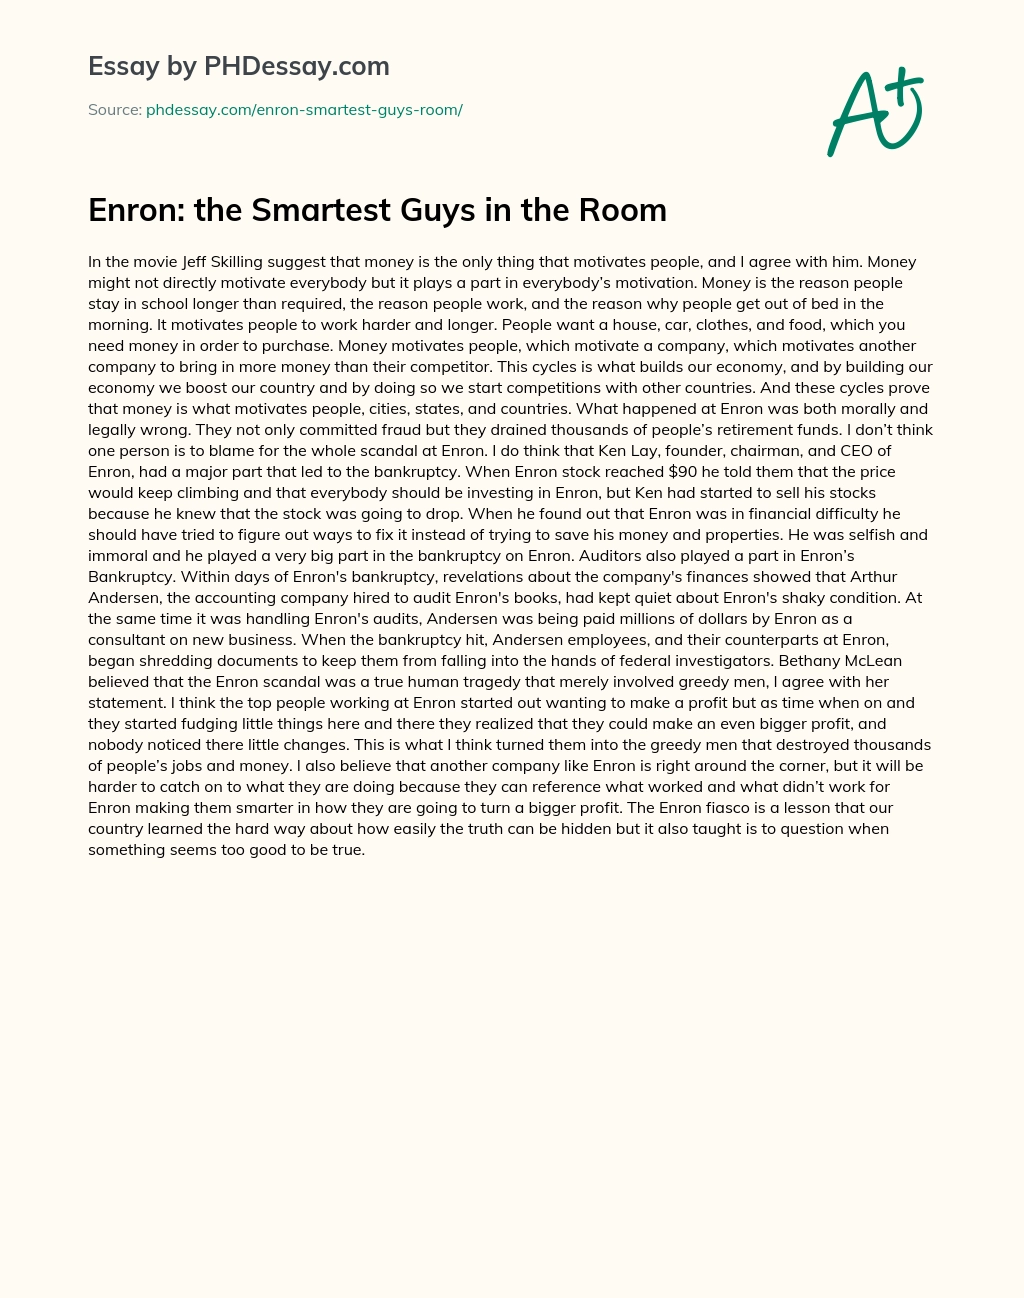 Enron: the Smartest Guys in the Room essay